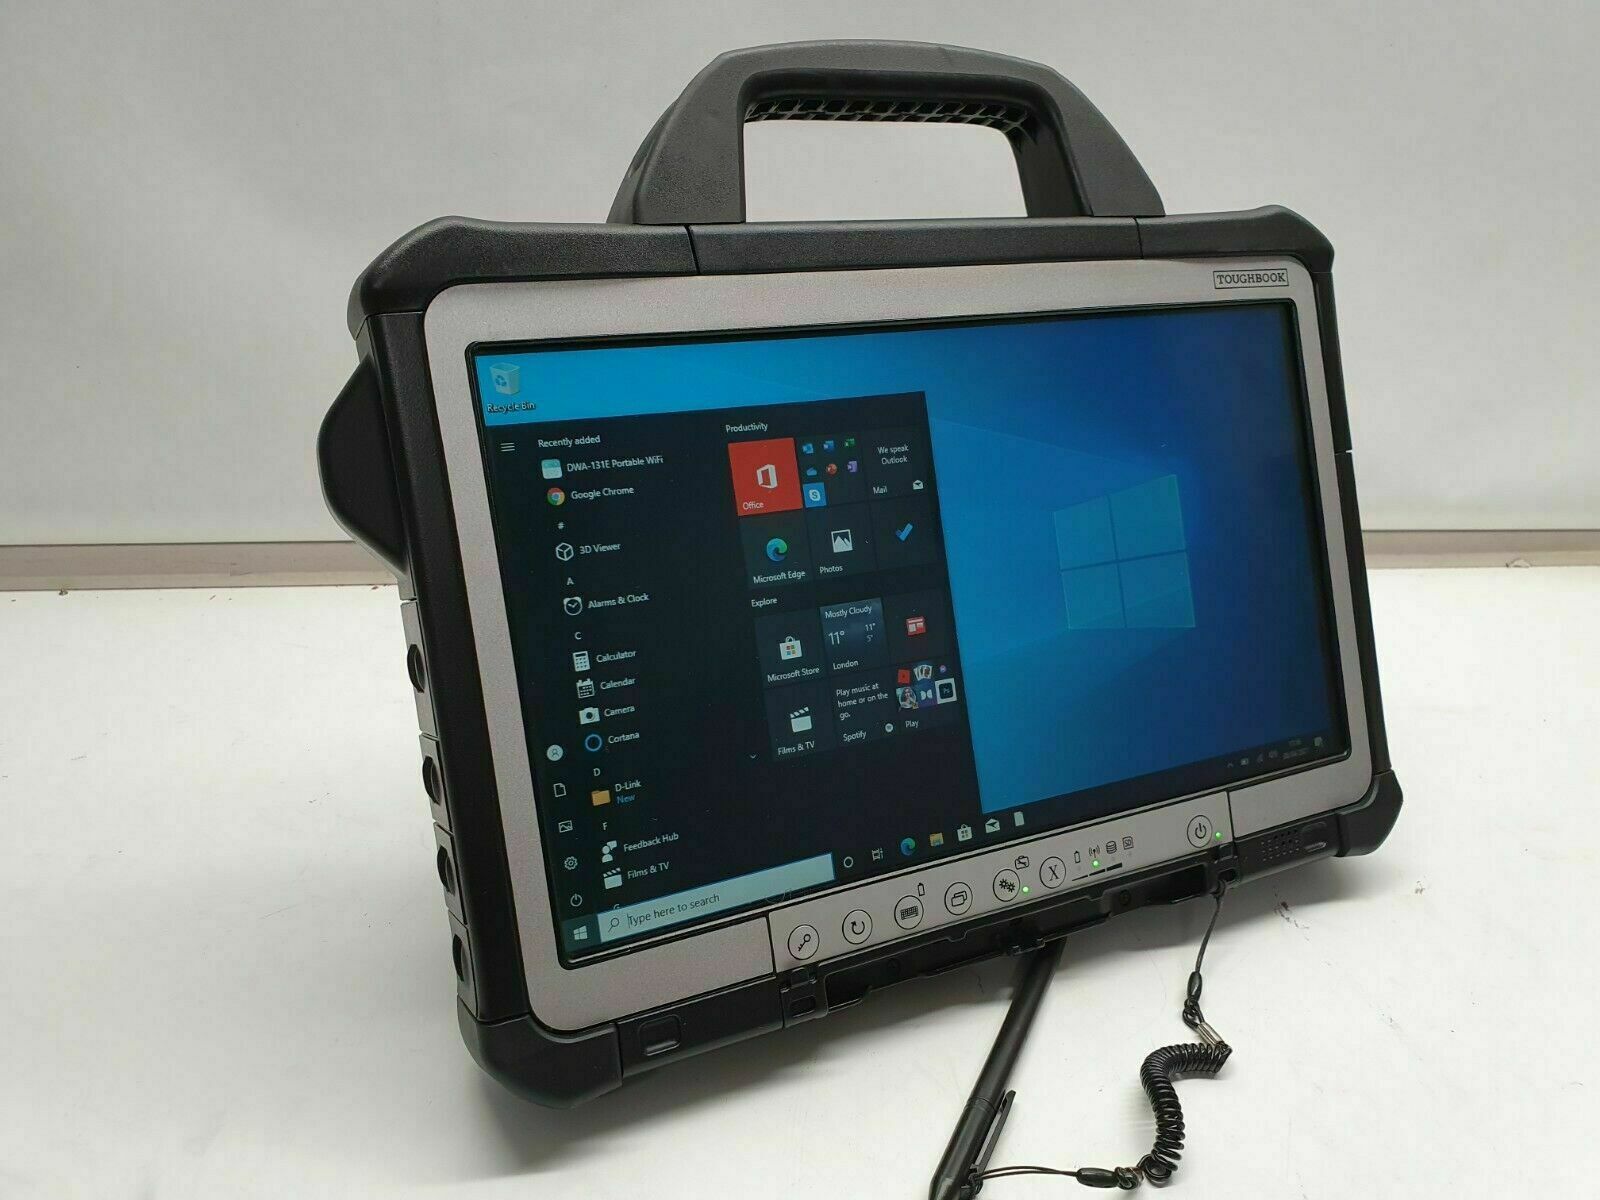 PC/タブレット ノートPC PANASONIC TOUGHBOOK CF-D1 MK3 6TH GEN i5-6300U 2.40GHZ 8GB 500GB XENTRY  TABLET